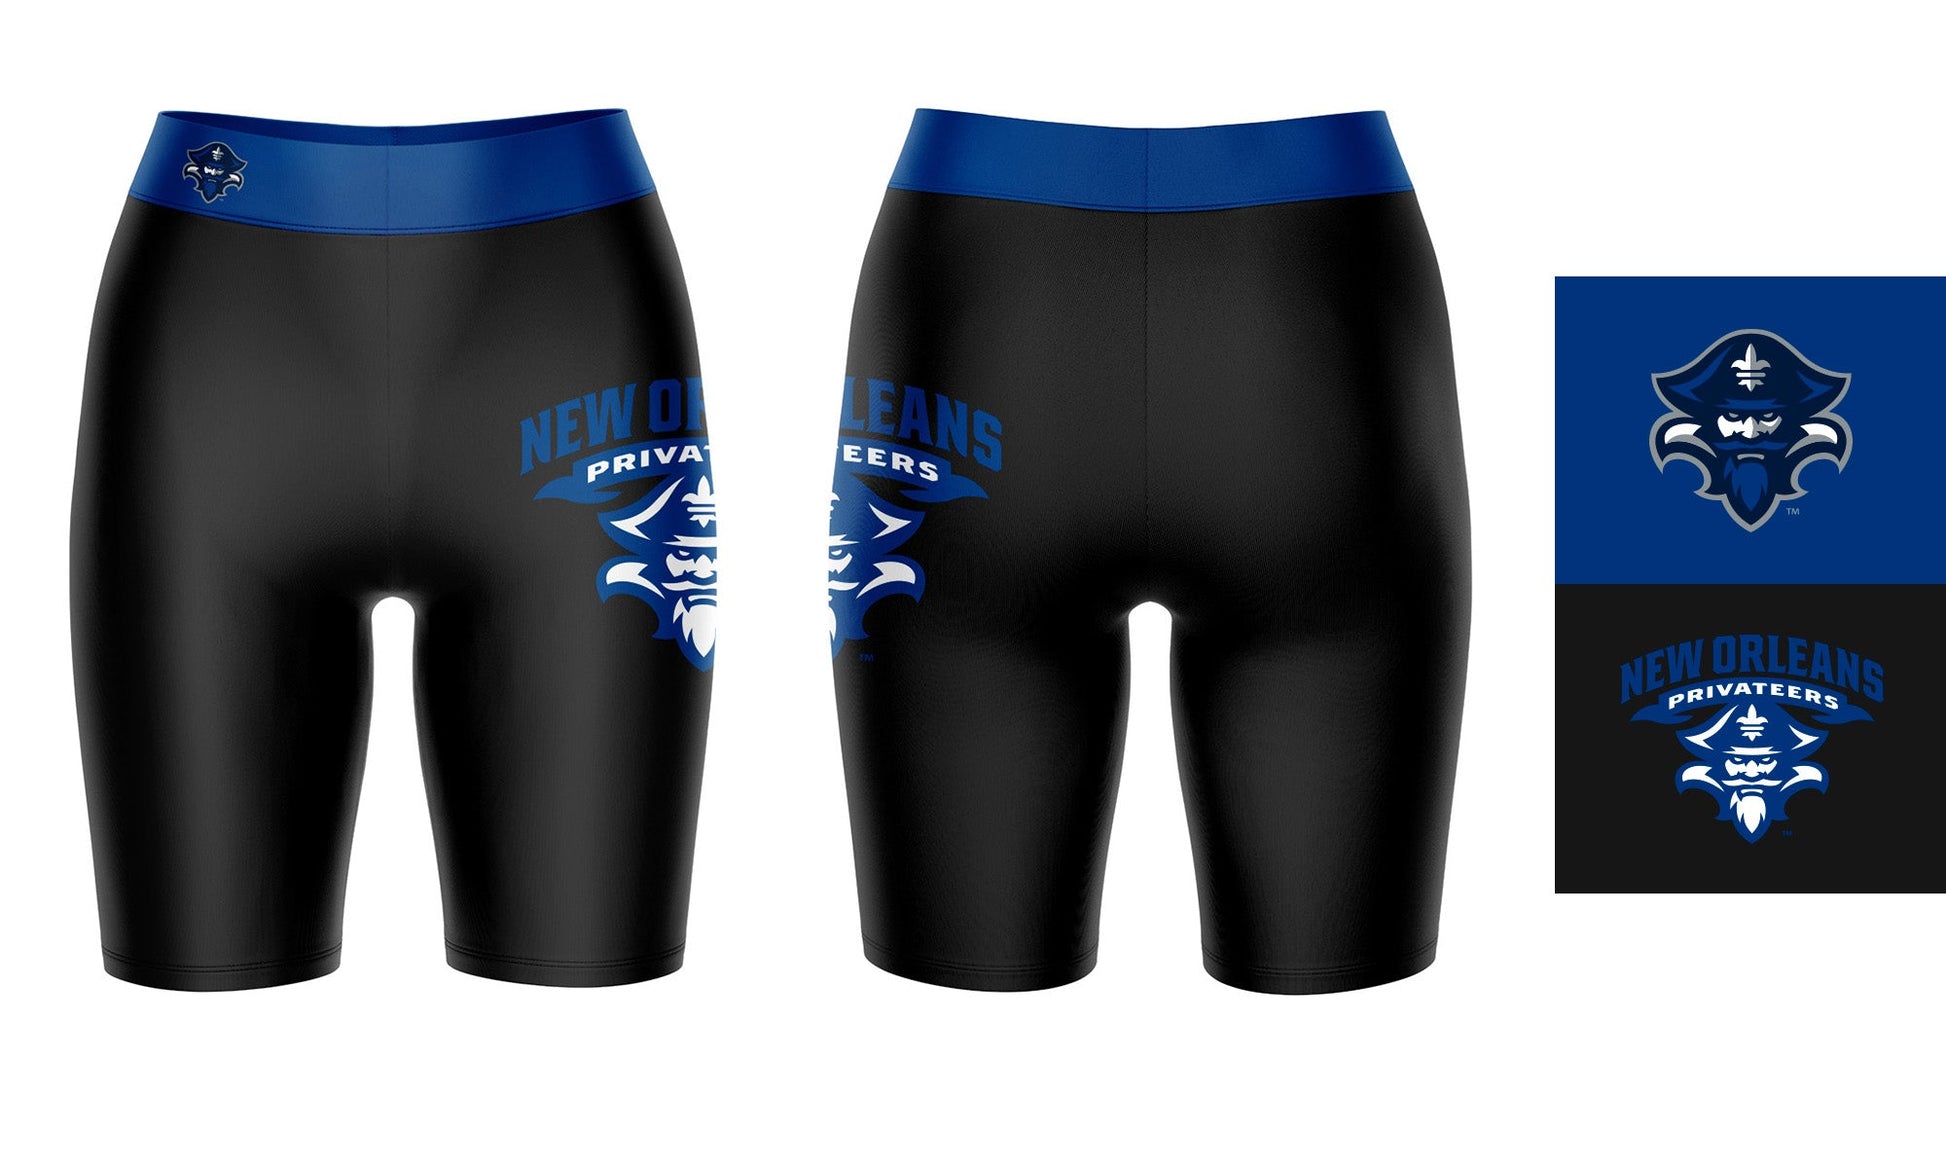 New Orleans Privateers UNO Vive La Fete Game Day Logo on Thigh and Waistband Black and Blue Women Bike Short 9 Inseam"